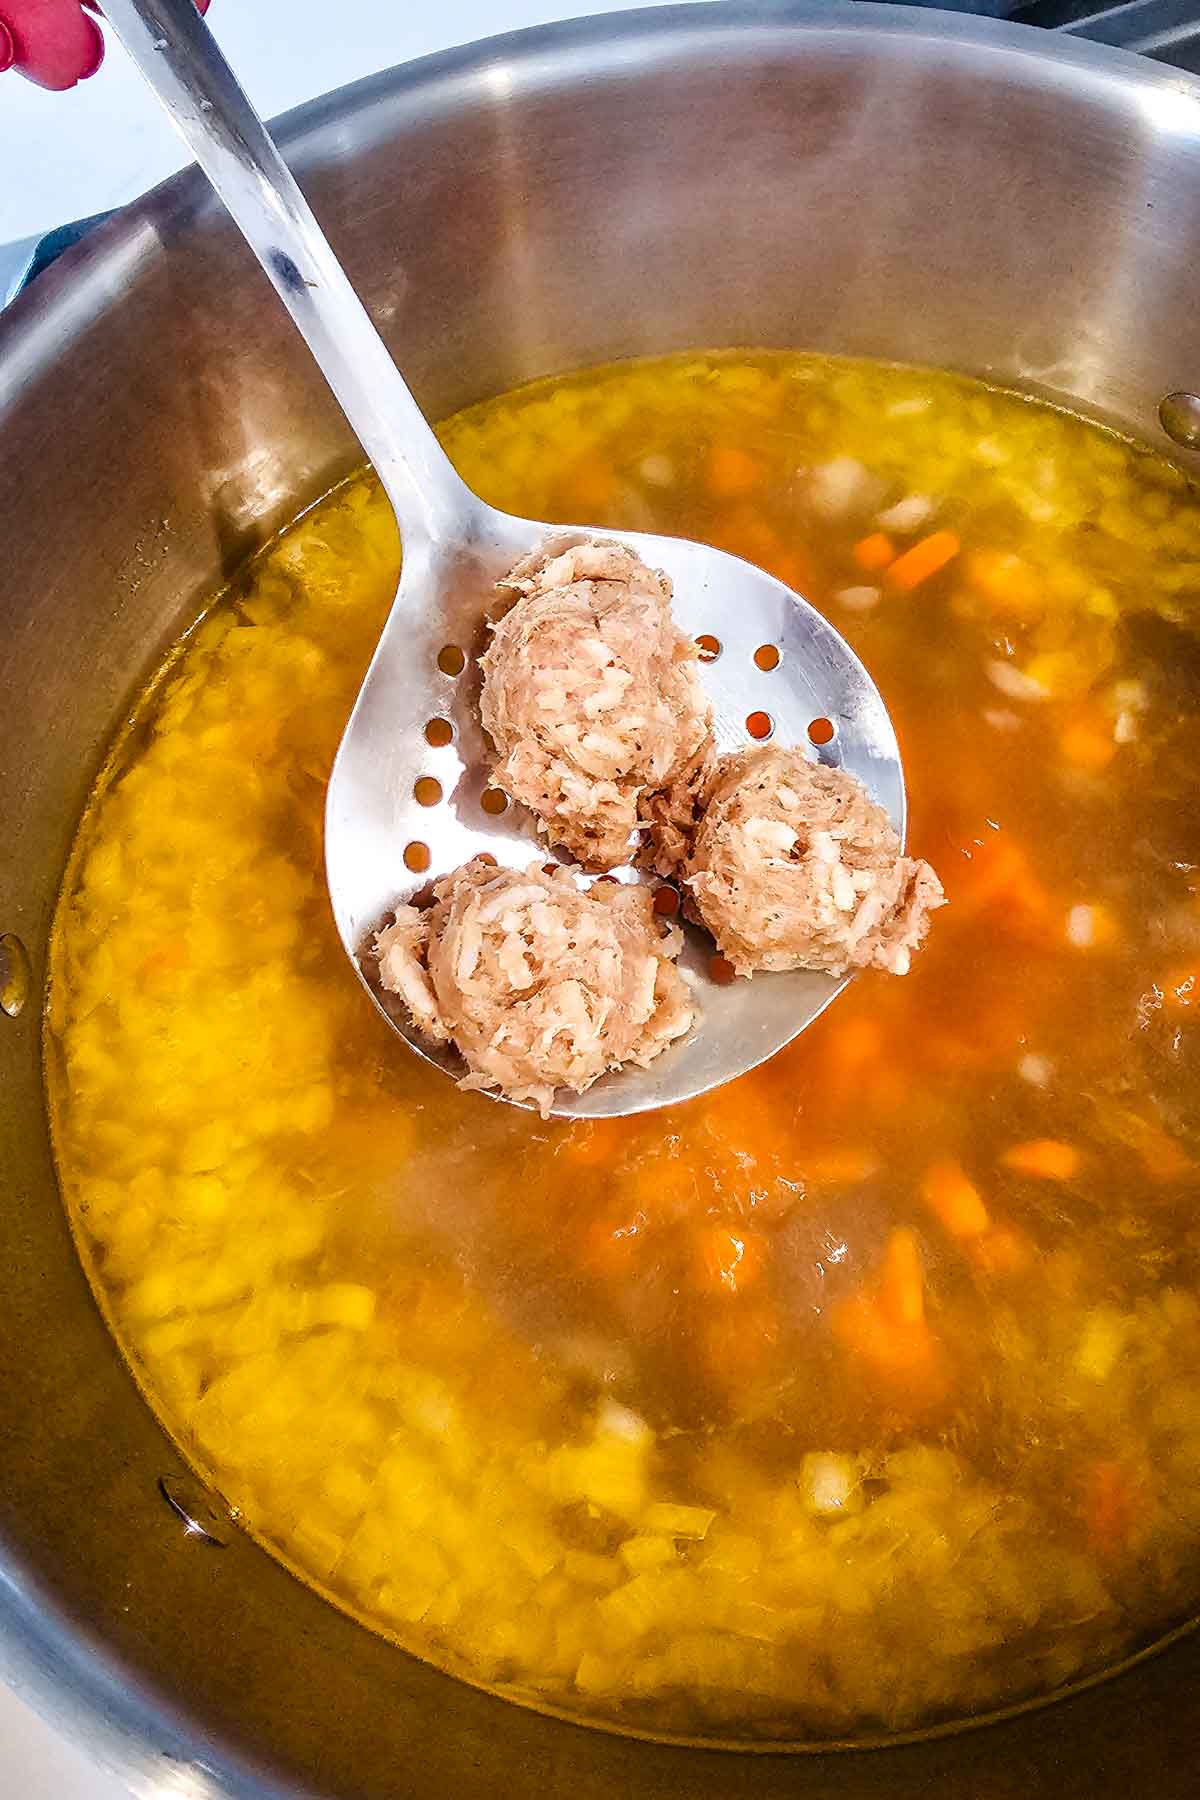 meatballs being added to a hot broth with veggies.